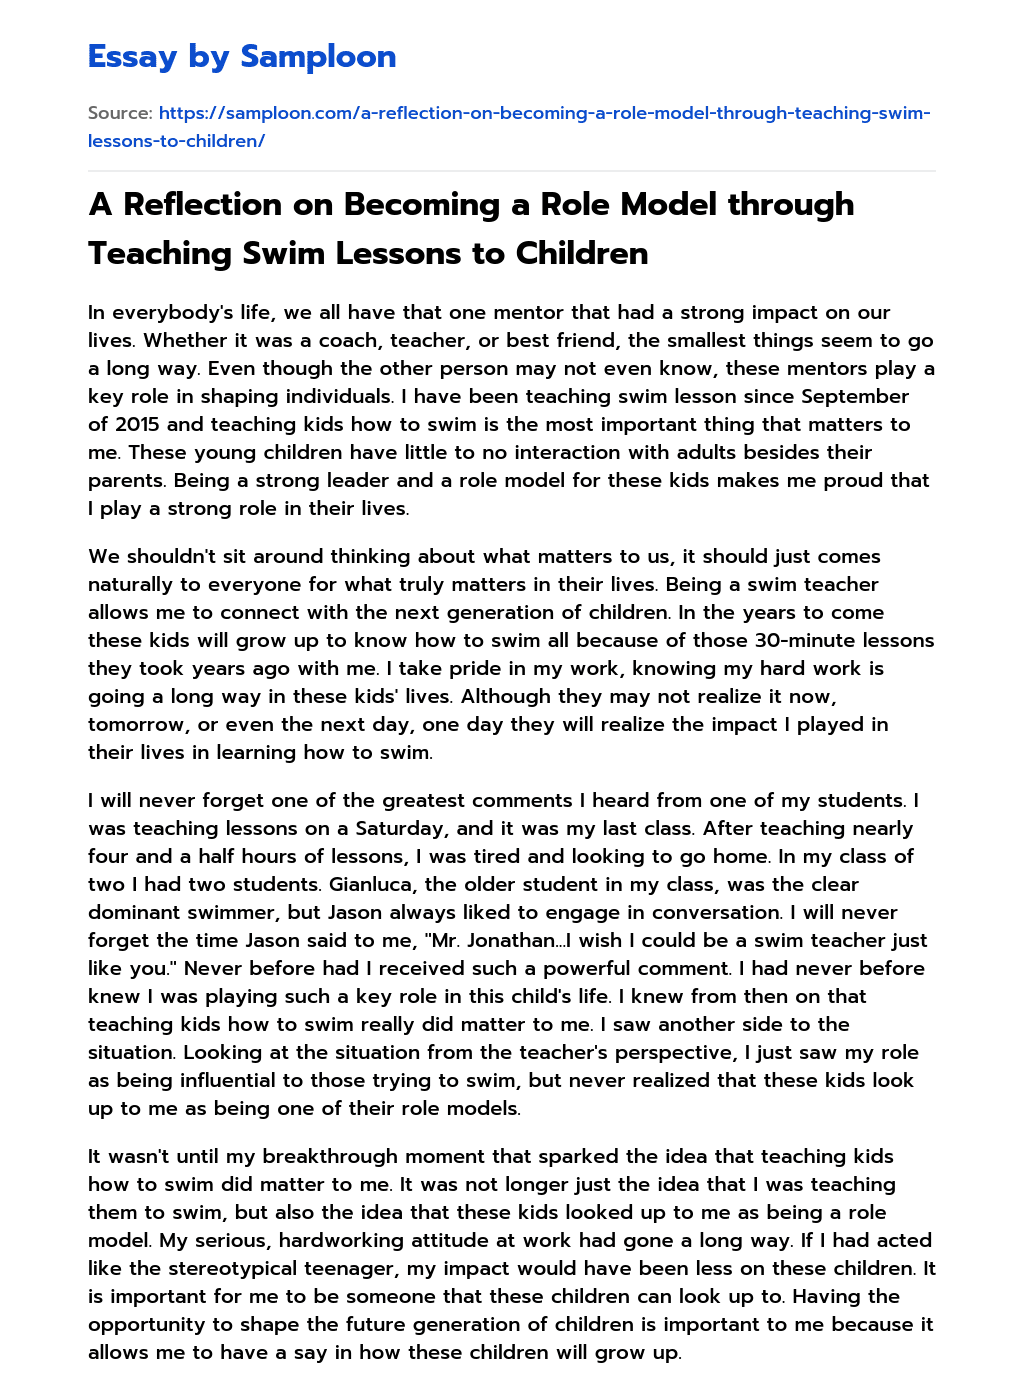 A Reflection on Becoming a Role Model through Teaching Swim Lessons to Children essay